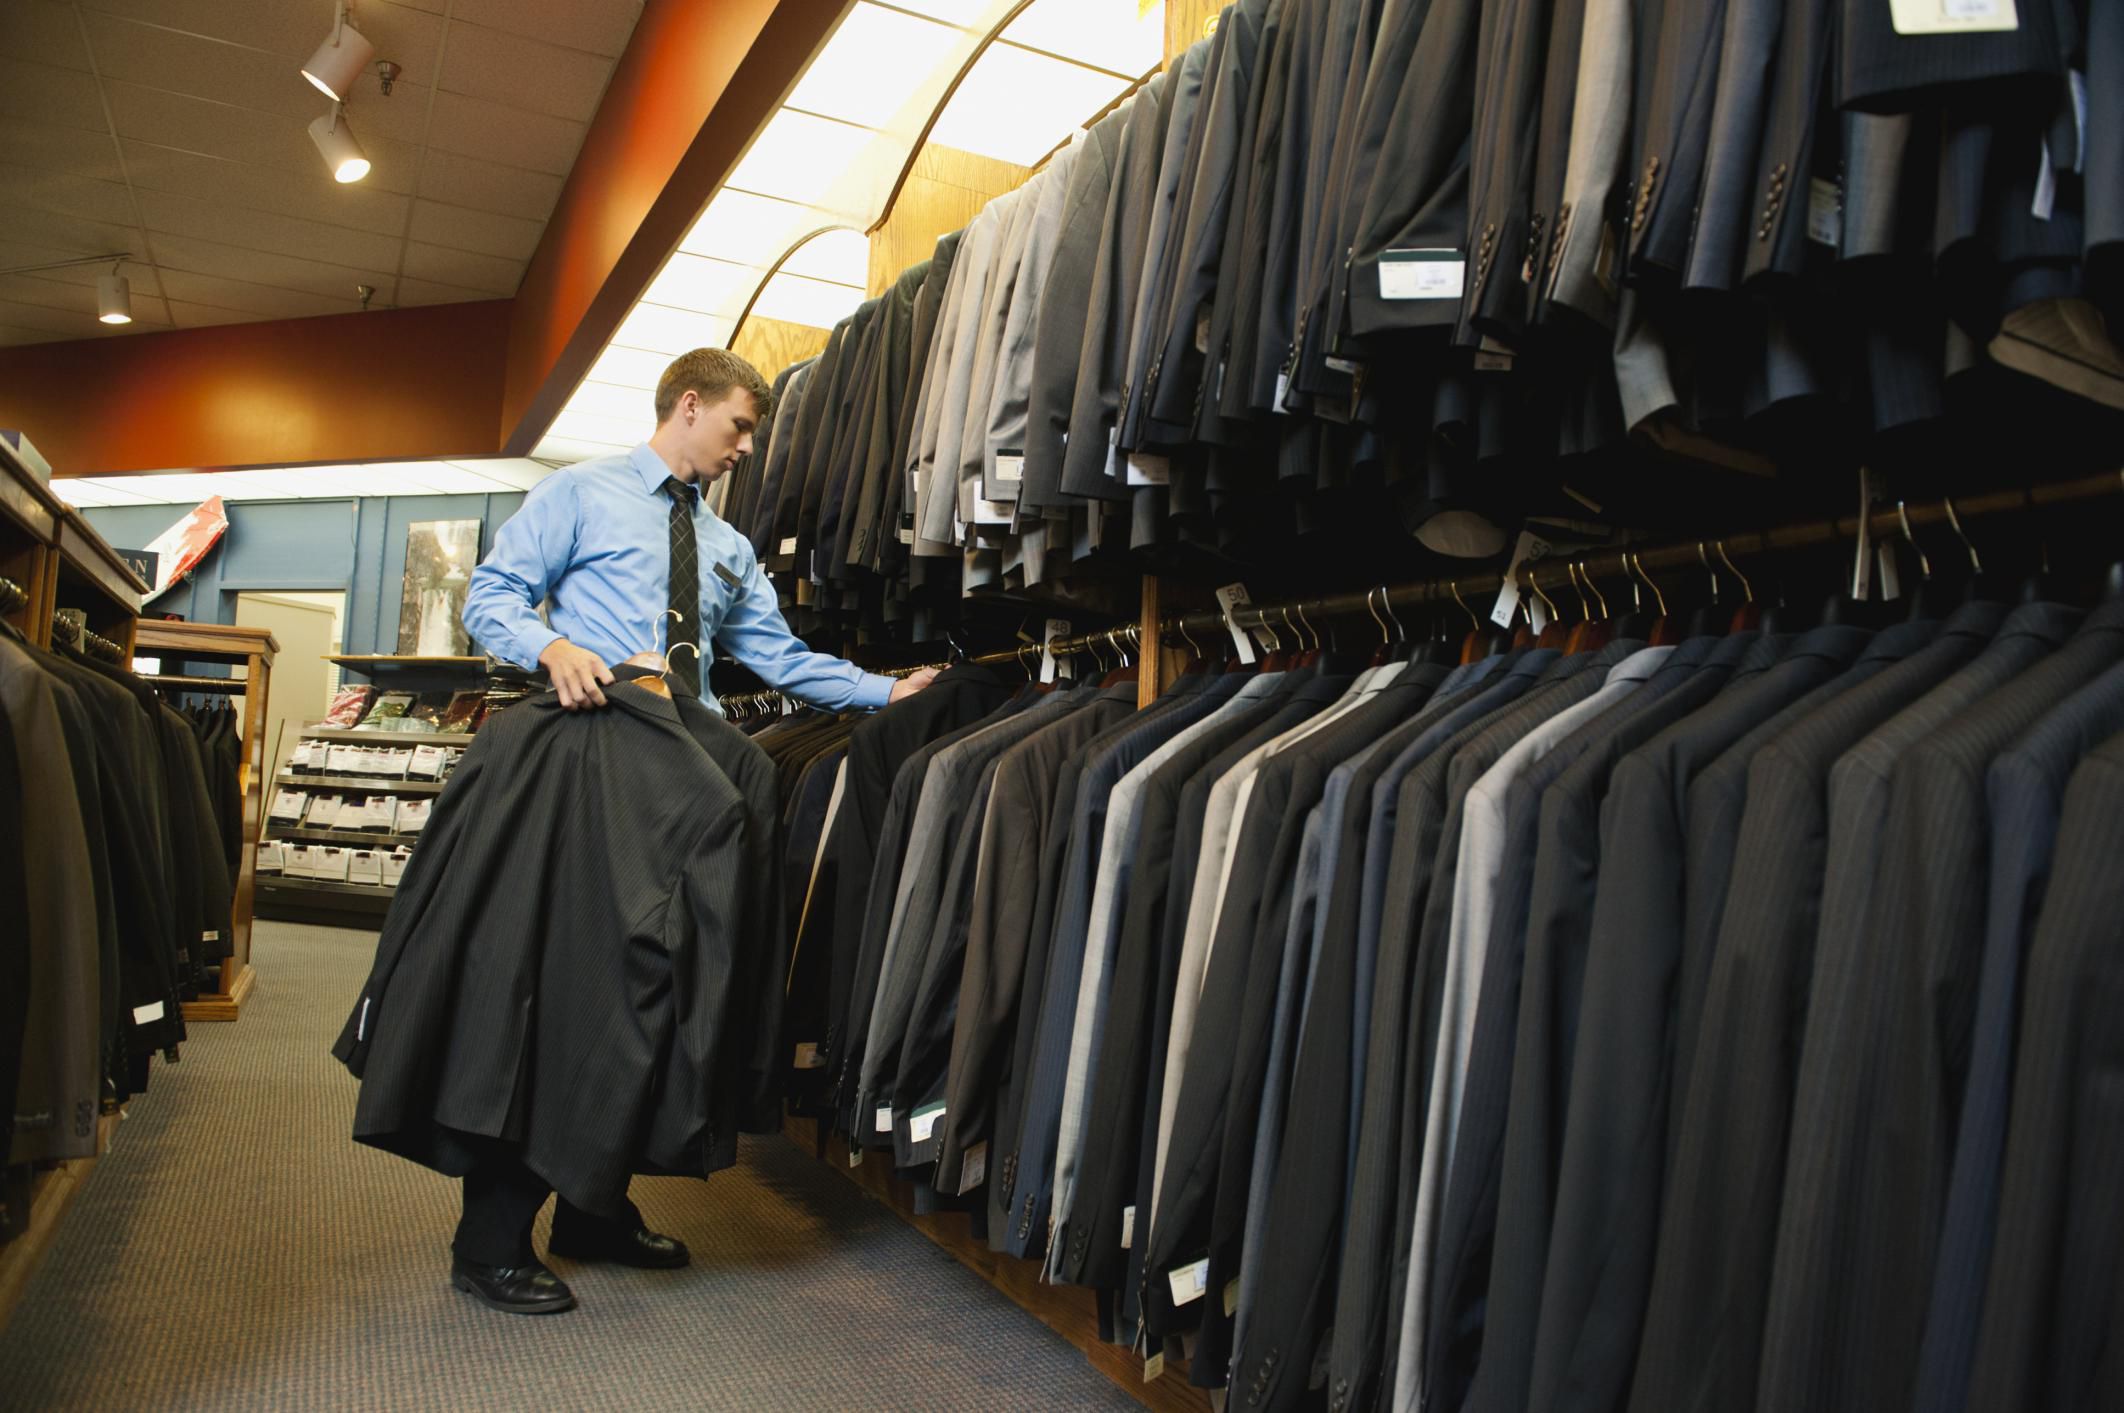 Where to Donate Business Suits to Those in Need